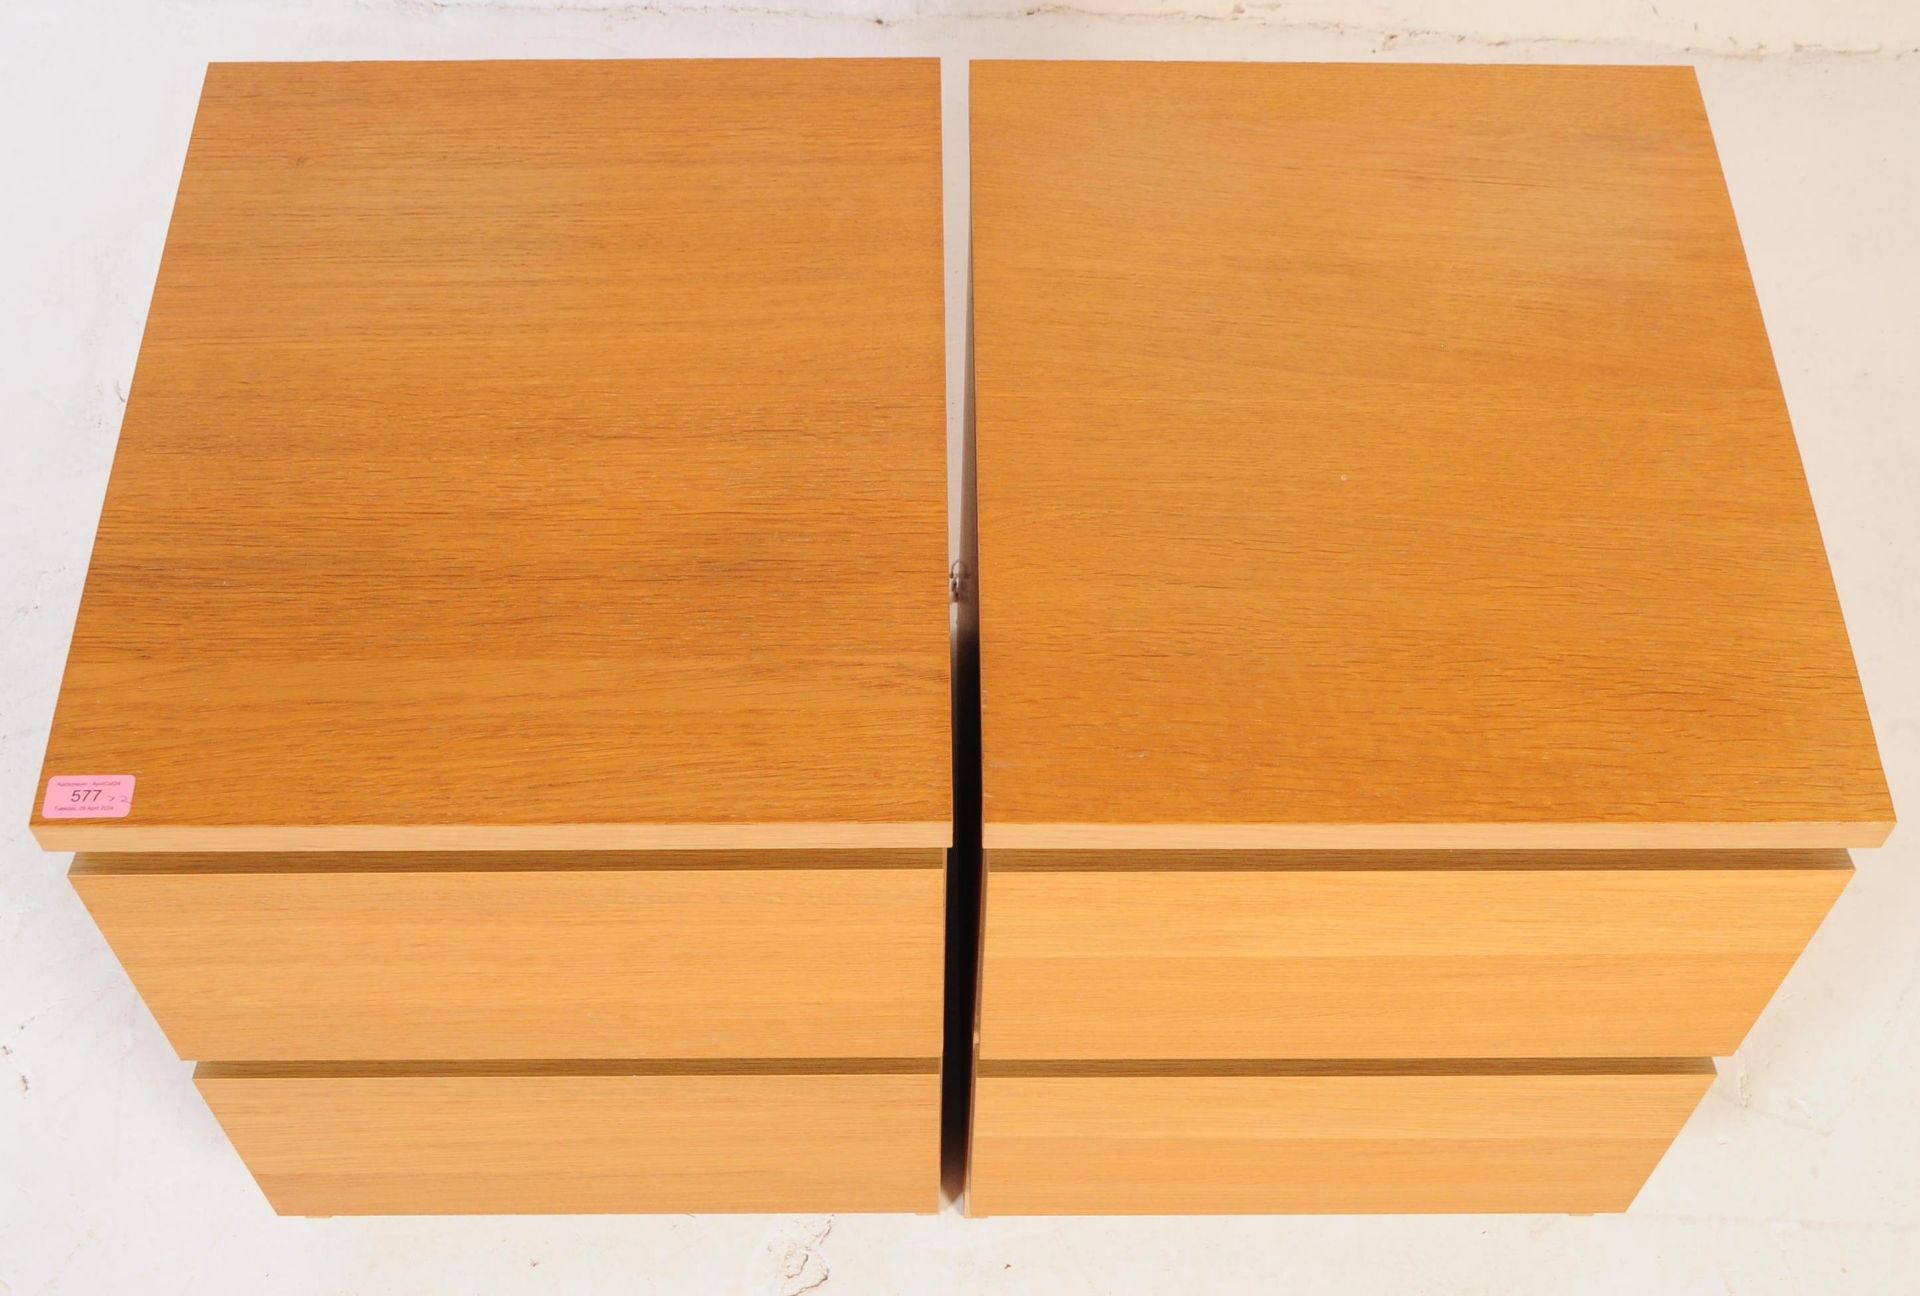 IKEA MALM - PAIR OF 20TH CENTURY BEECH BEDSIDES - Image 4 of 6